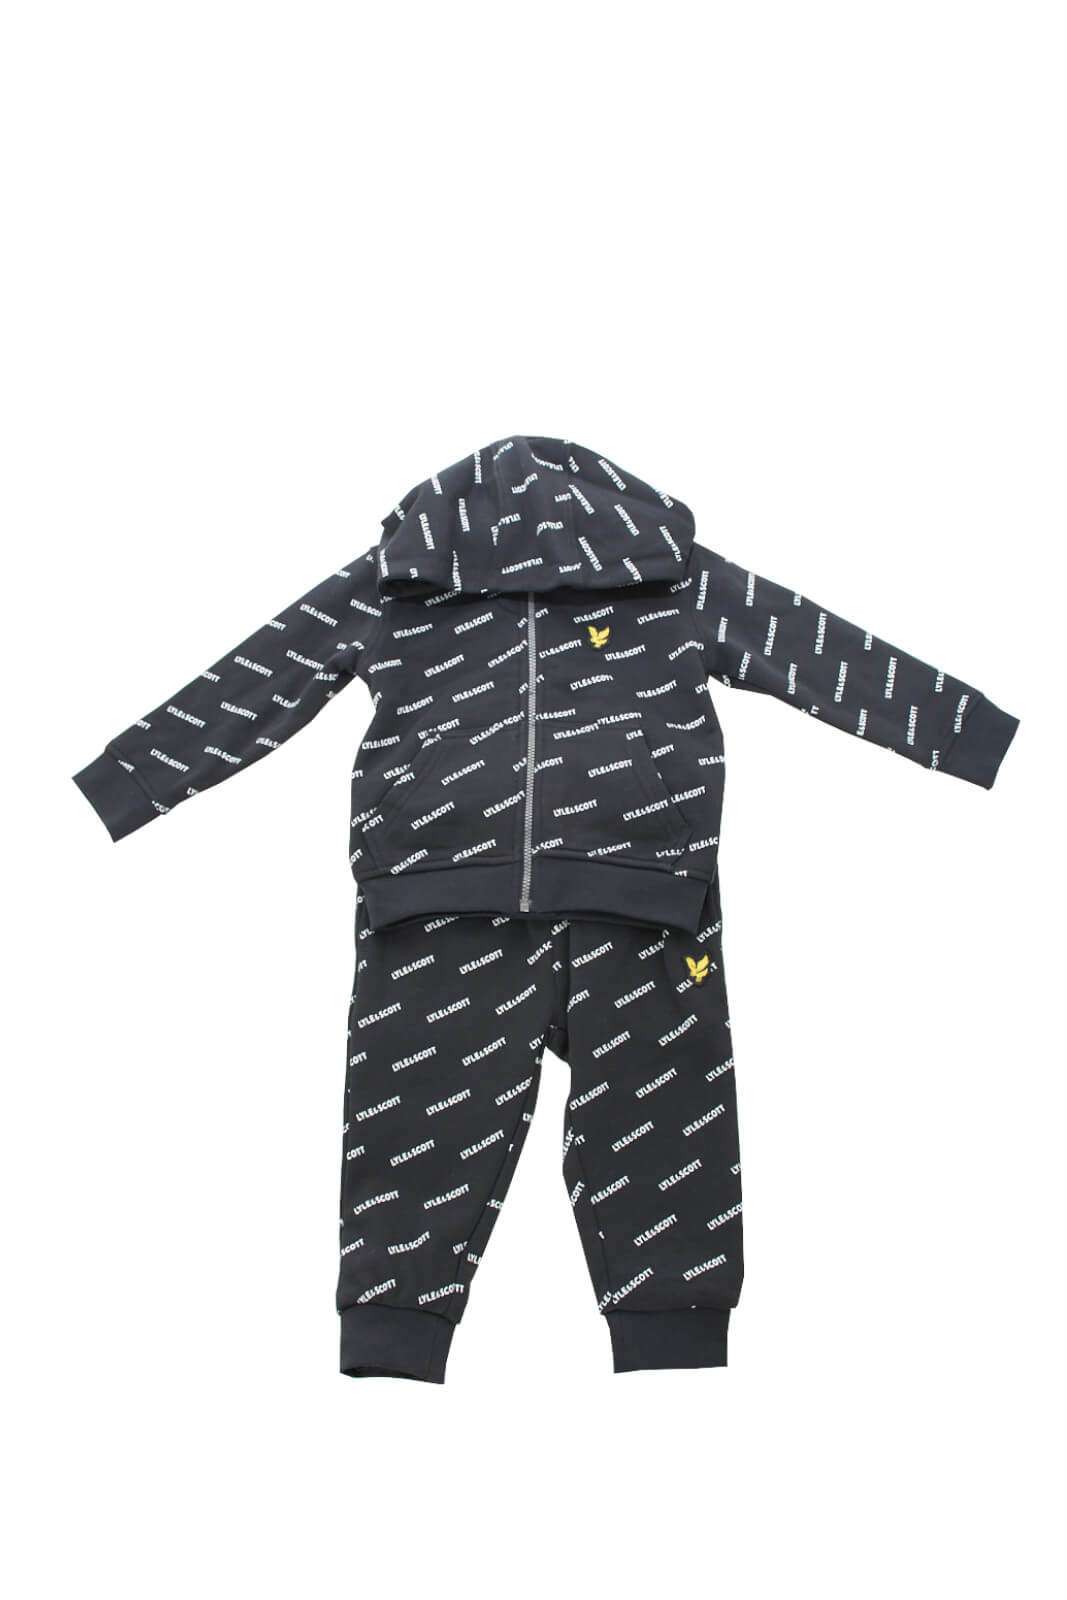 Lyle and Scott Complete Child Tracksuit with writings